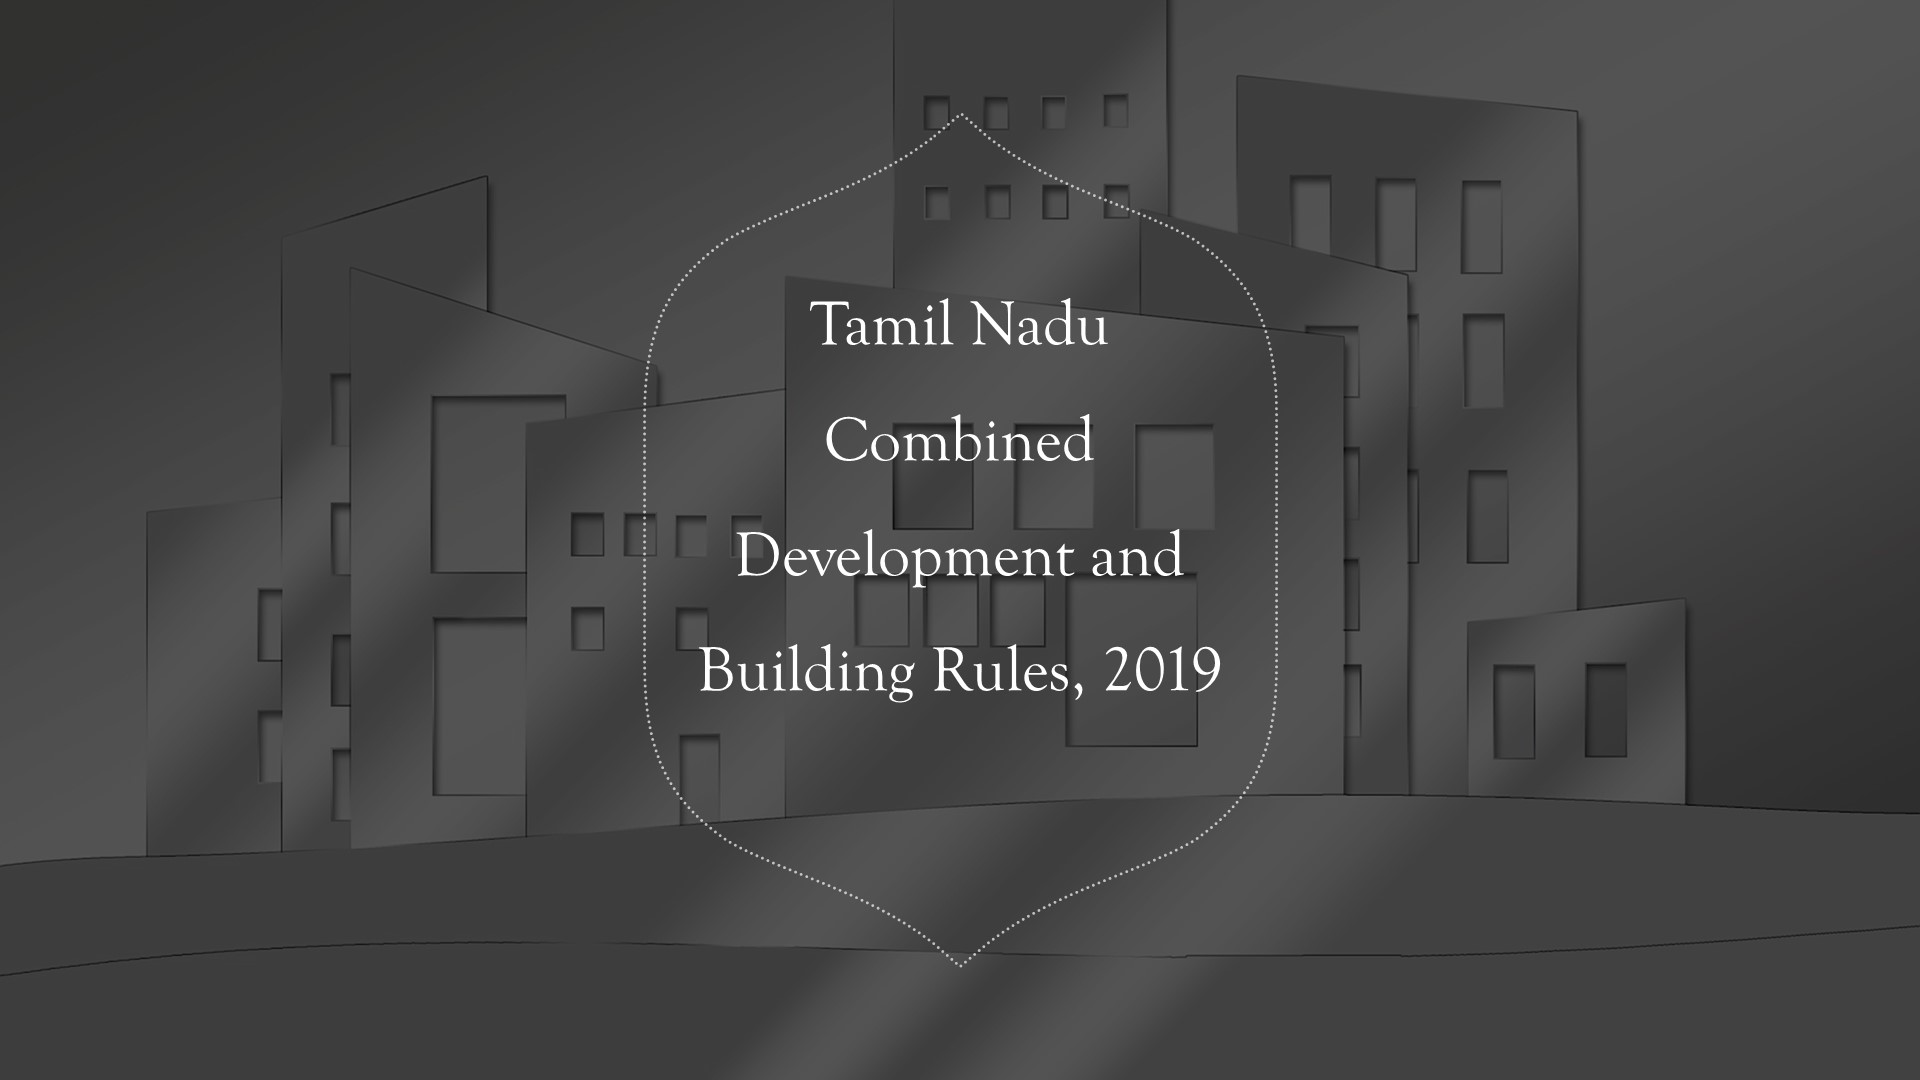 Tamil Nadu Combined Development and Building Rules, 2019: An Overview